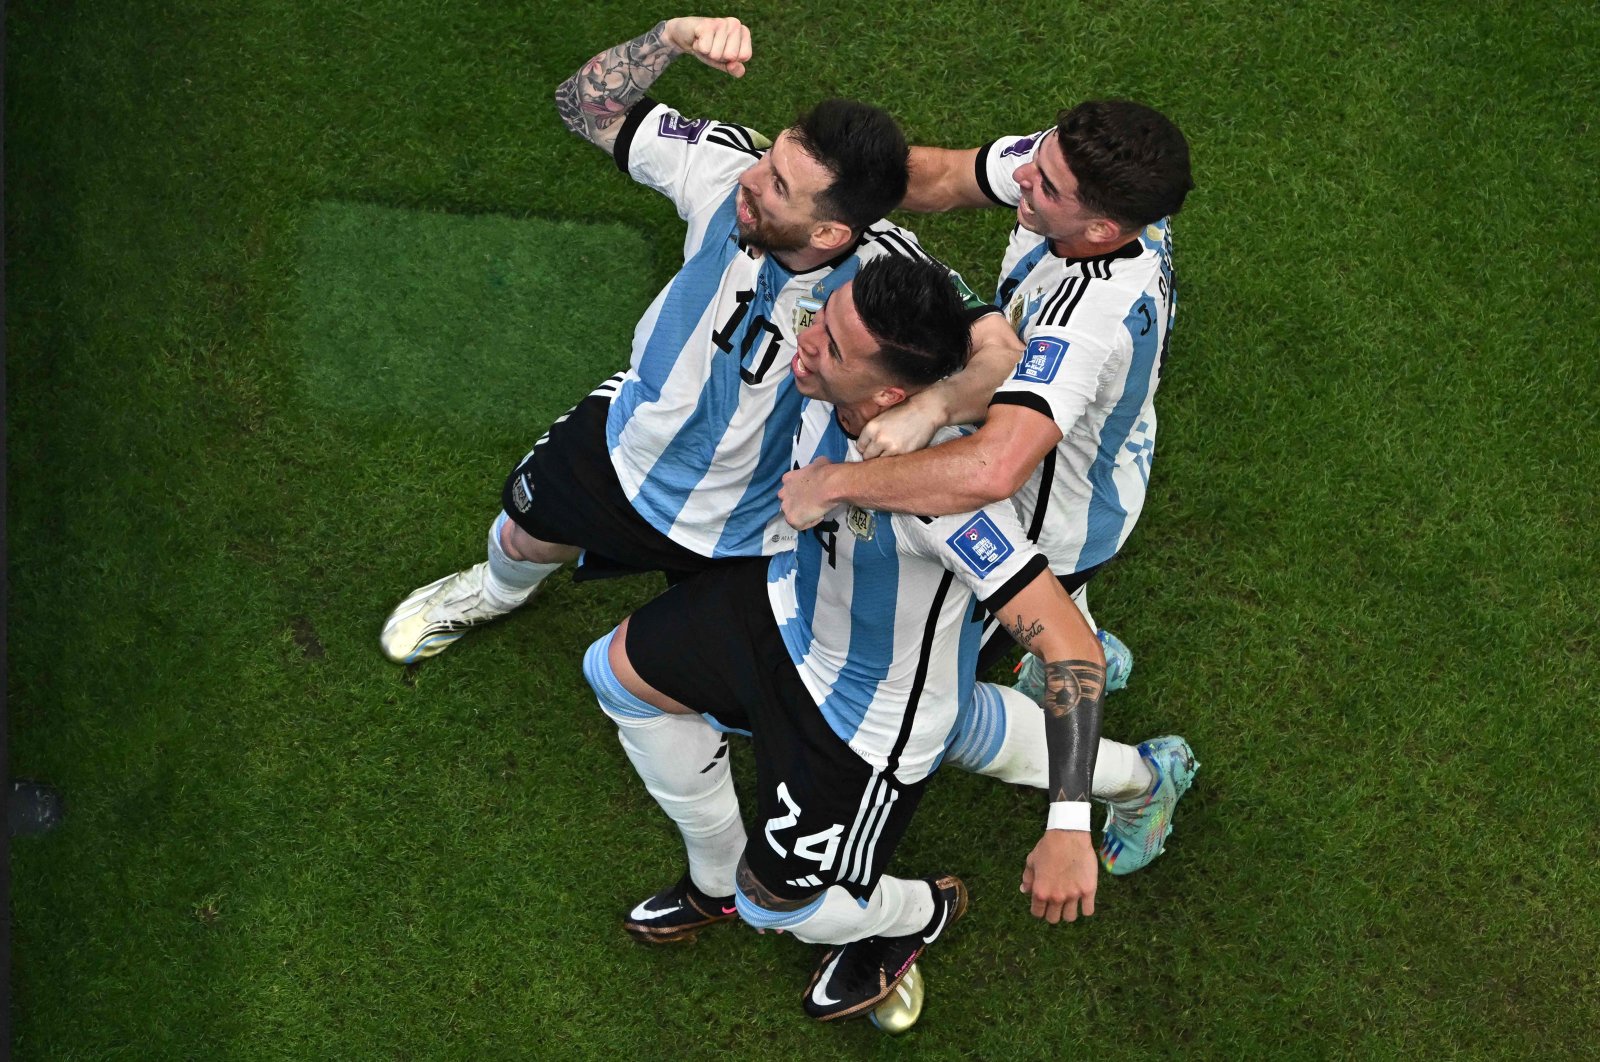 Argentina&#039;s Enzo Fernandez (C) and Lionel Messi (L) celebrate during the Qatar 2022 World Cup Group C football match between Argentina and Mexico, at the Lusail Stadium, in Lusail, Qatar, Nov. 26, 2022. (AFP Photo)